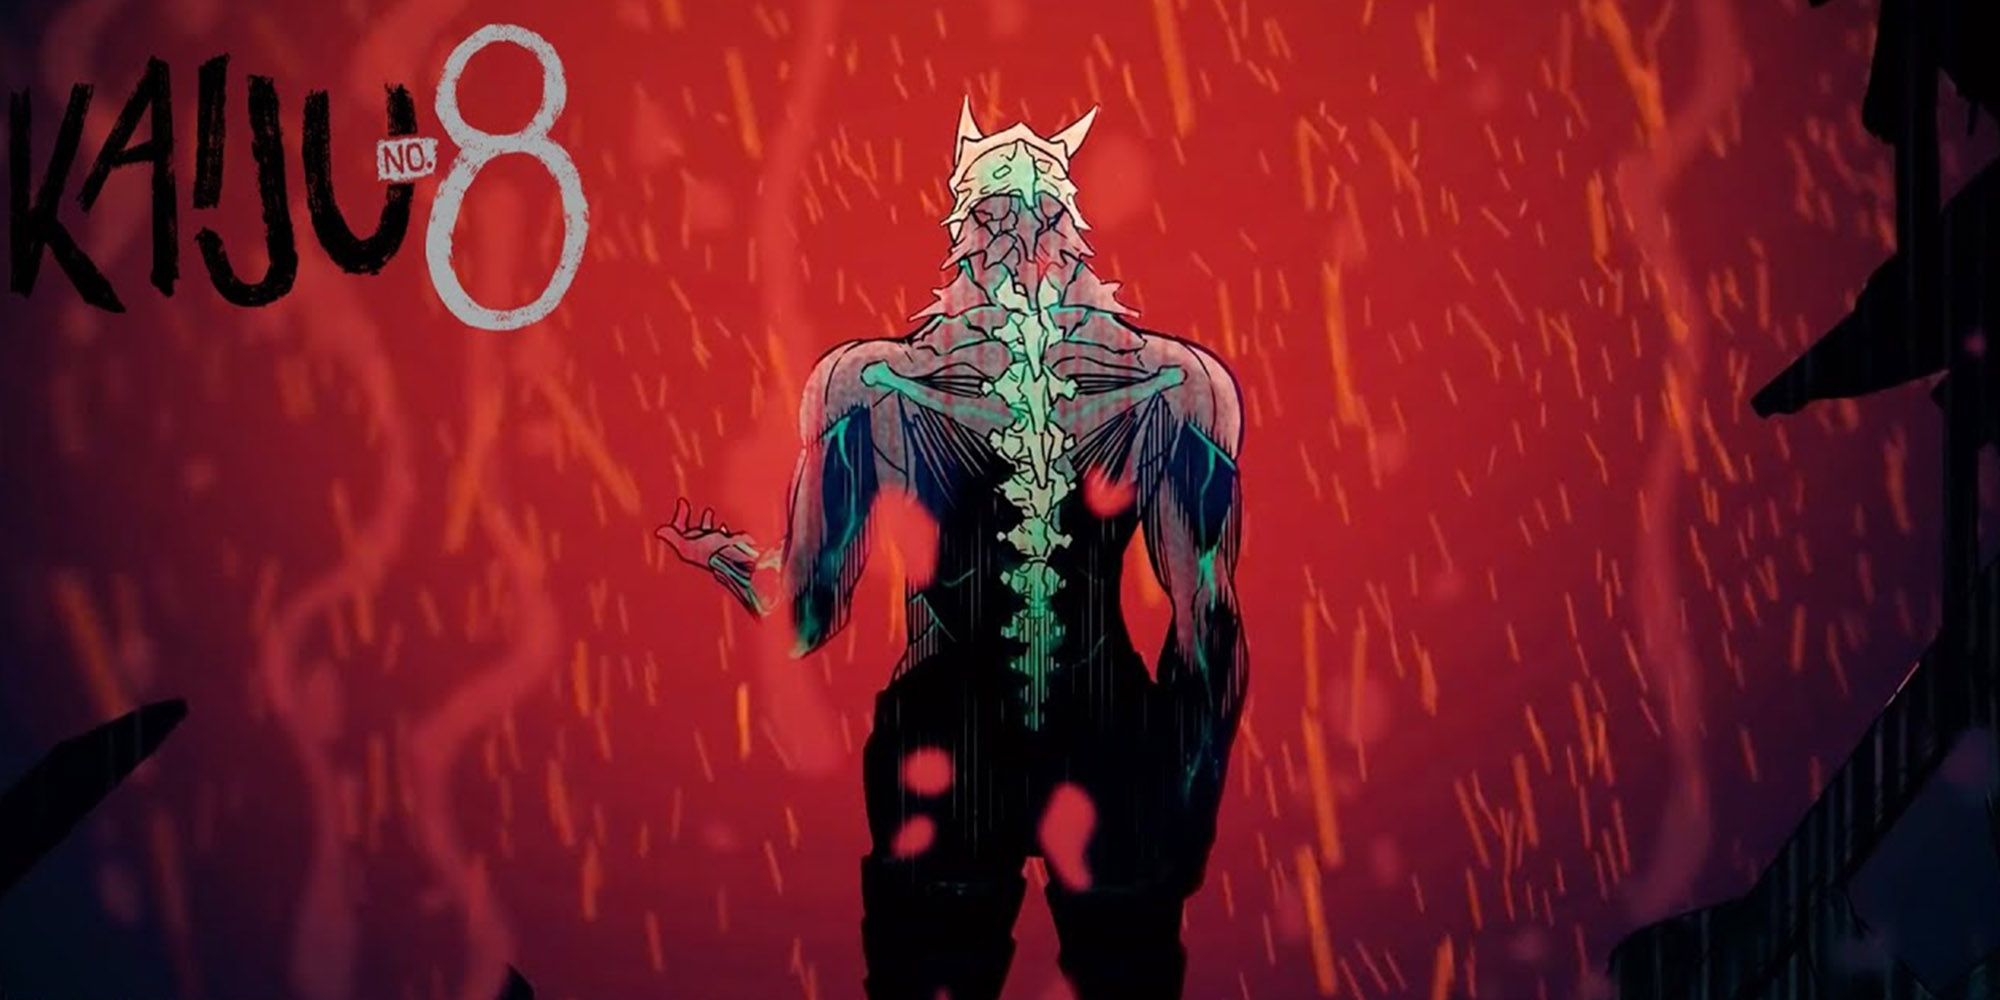 Kaiju No 8 - Main Character In Kaiju Form Standing In Downpour Of Blood